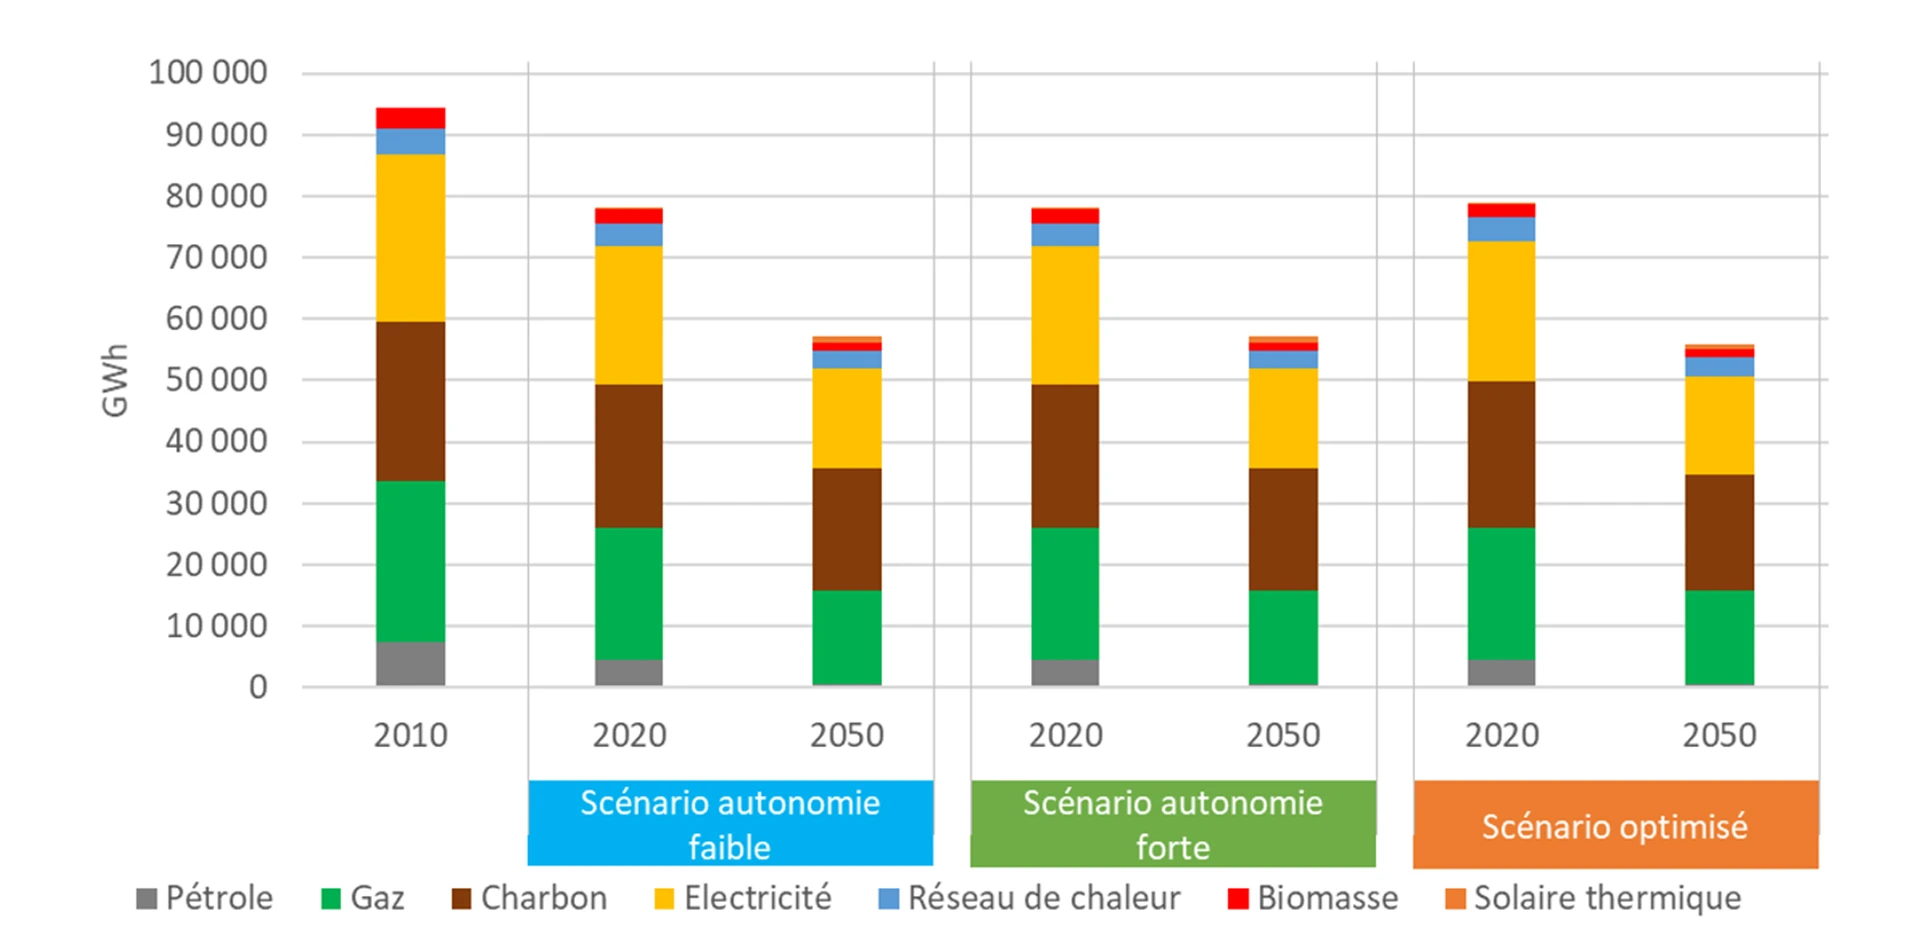 Final energy consumption in industry